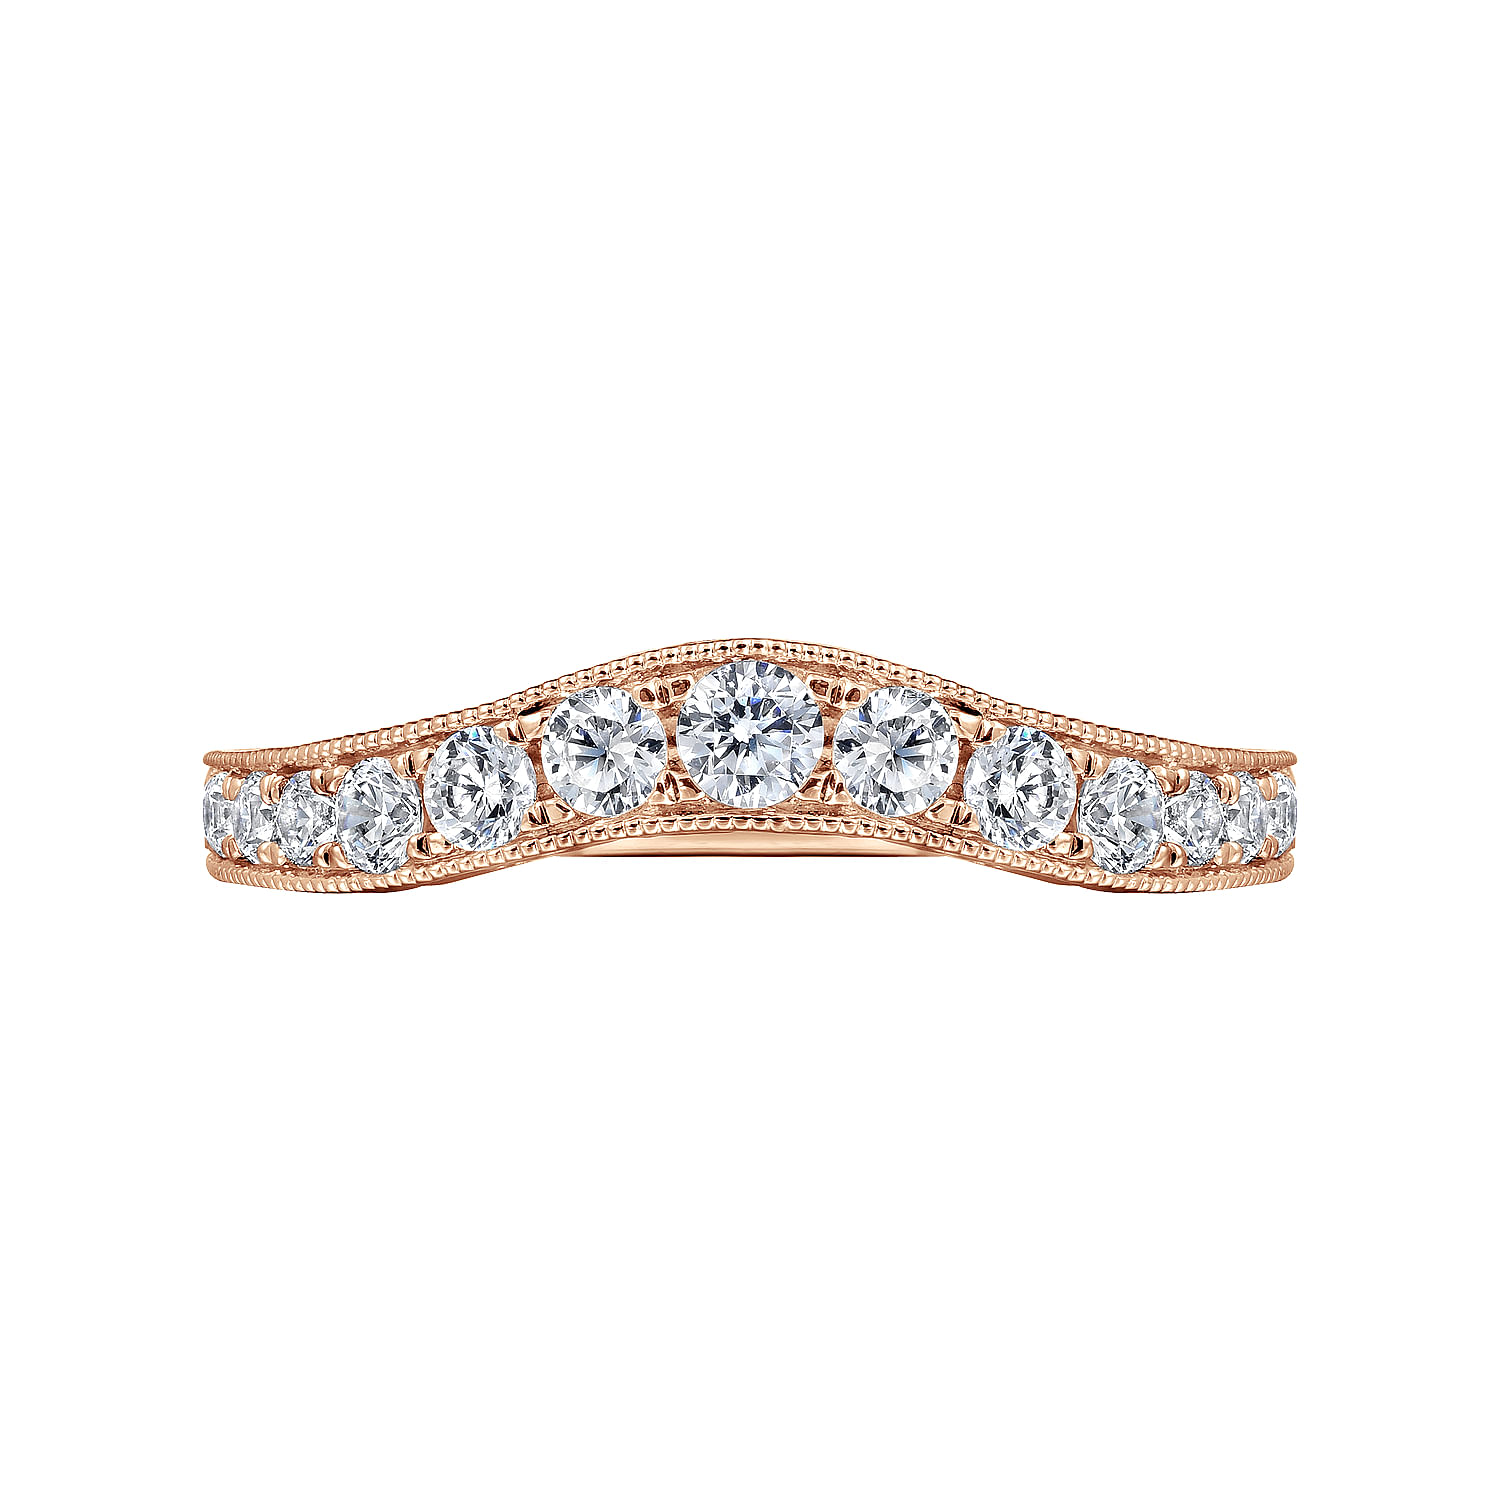 Vintage Inspired 14K Rose Gold Curved Channel Set Diamond Wedding Band with Engraving